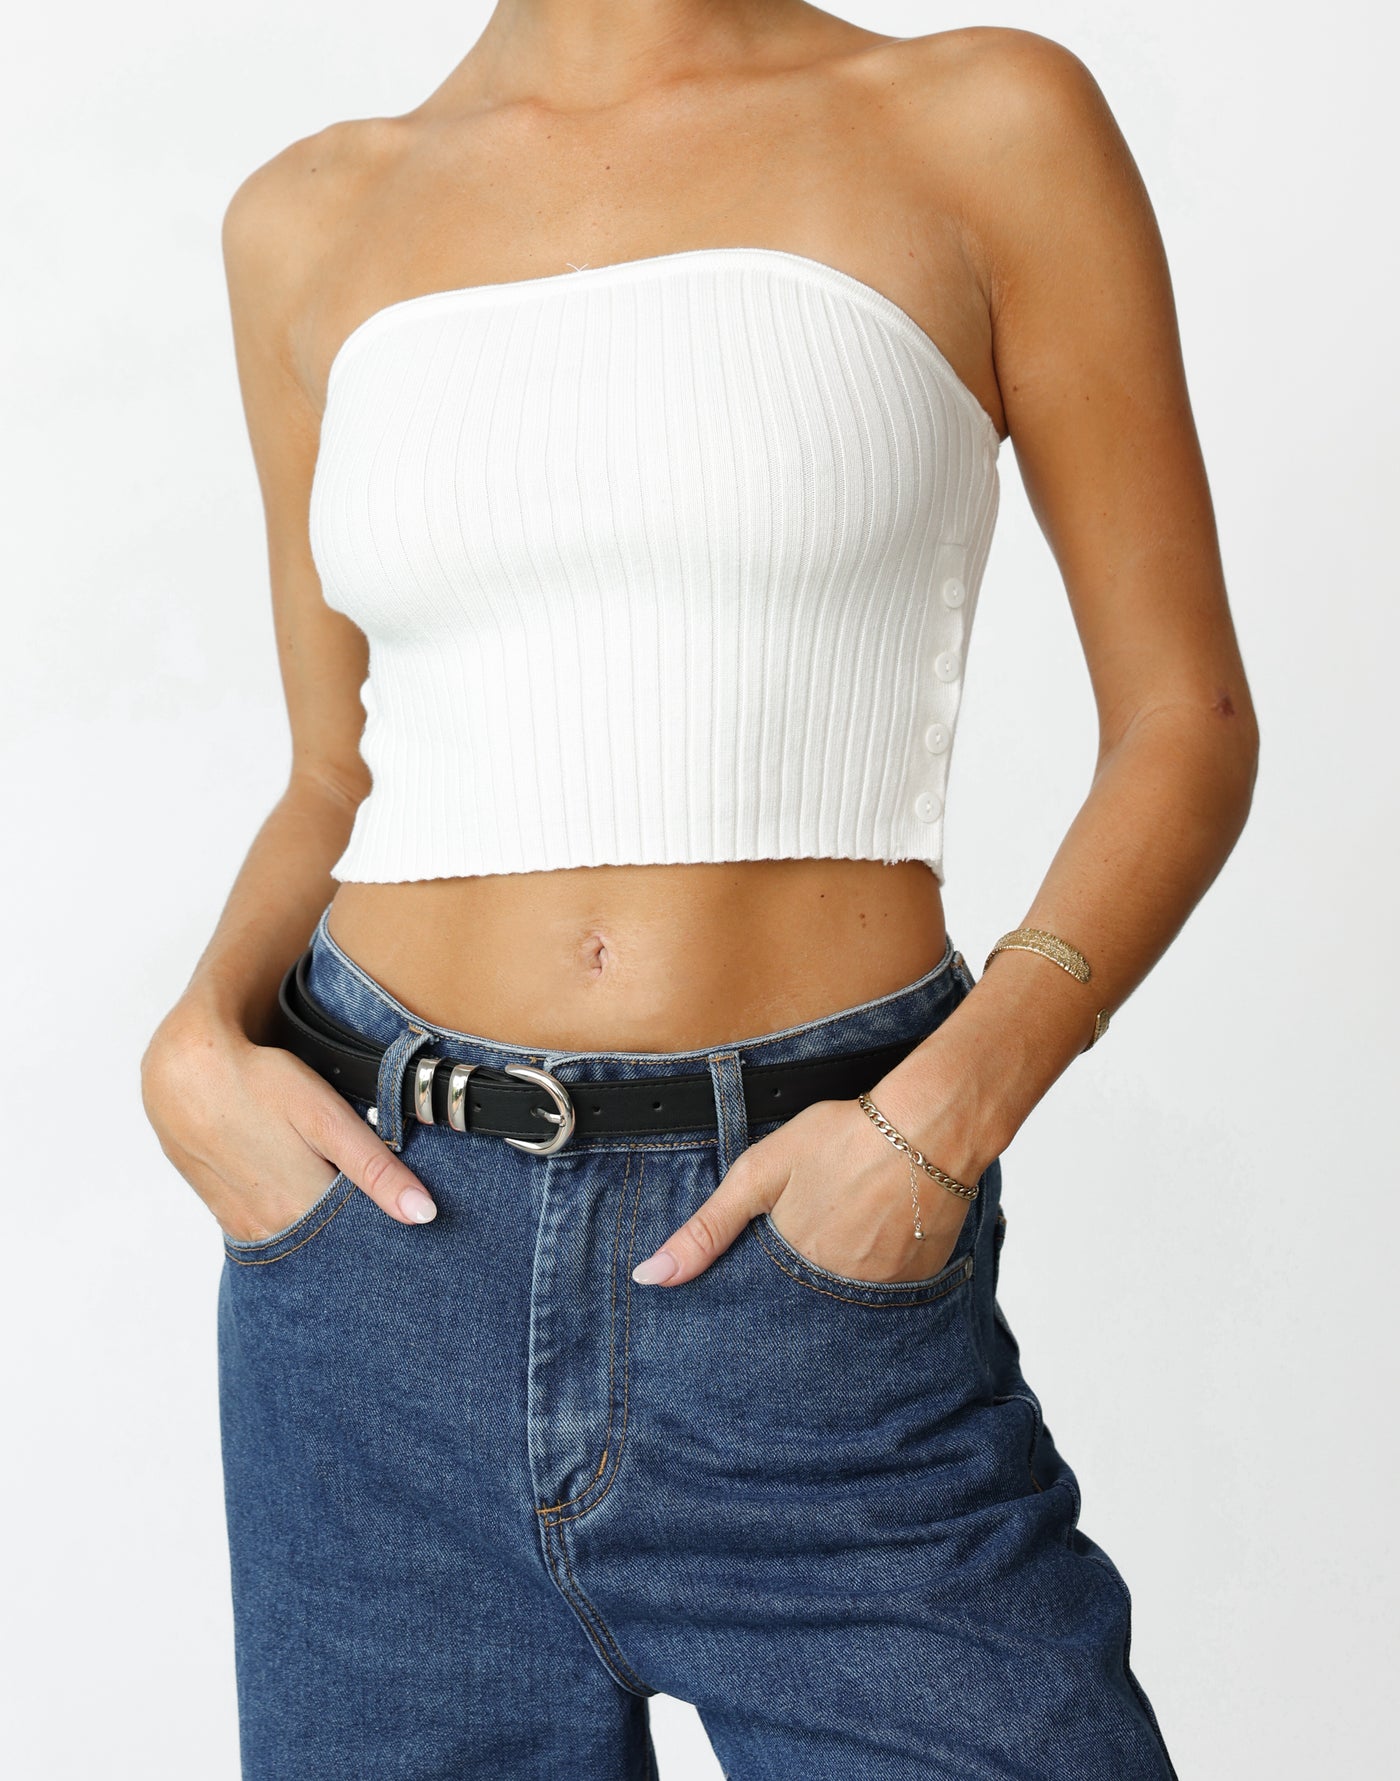 Yasmina Top (White) - Button Detail Strapless Ribbed Top - Women's Top - Charcoal Clothing